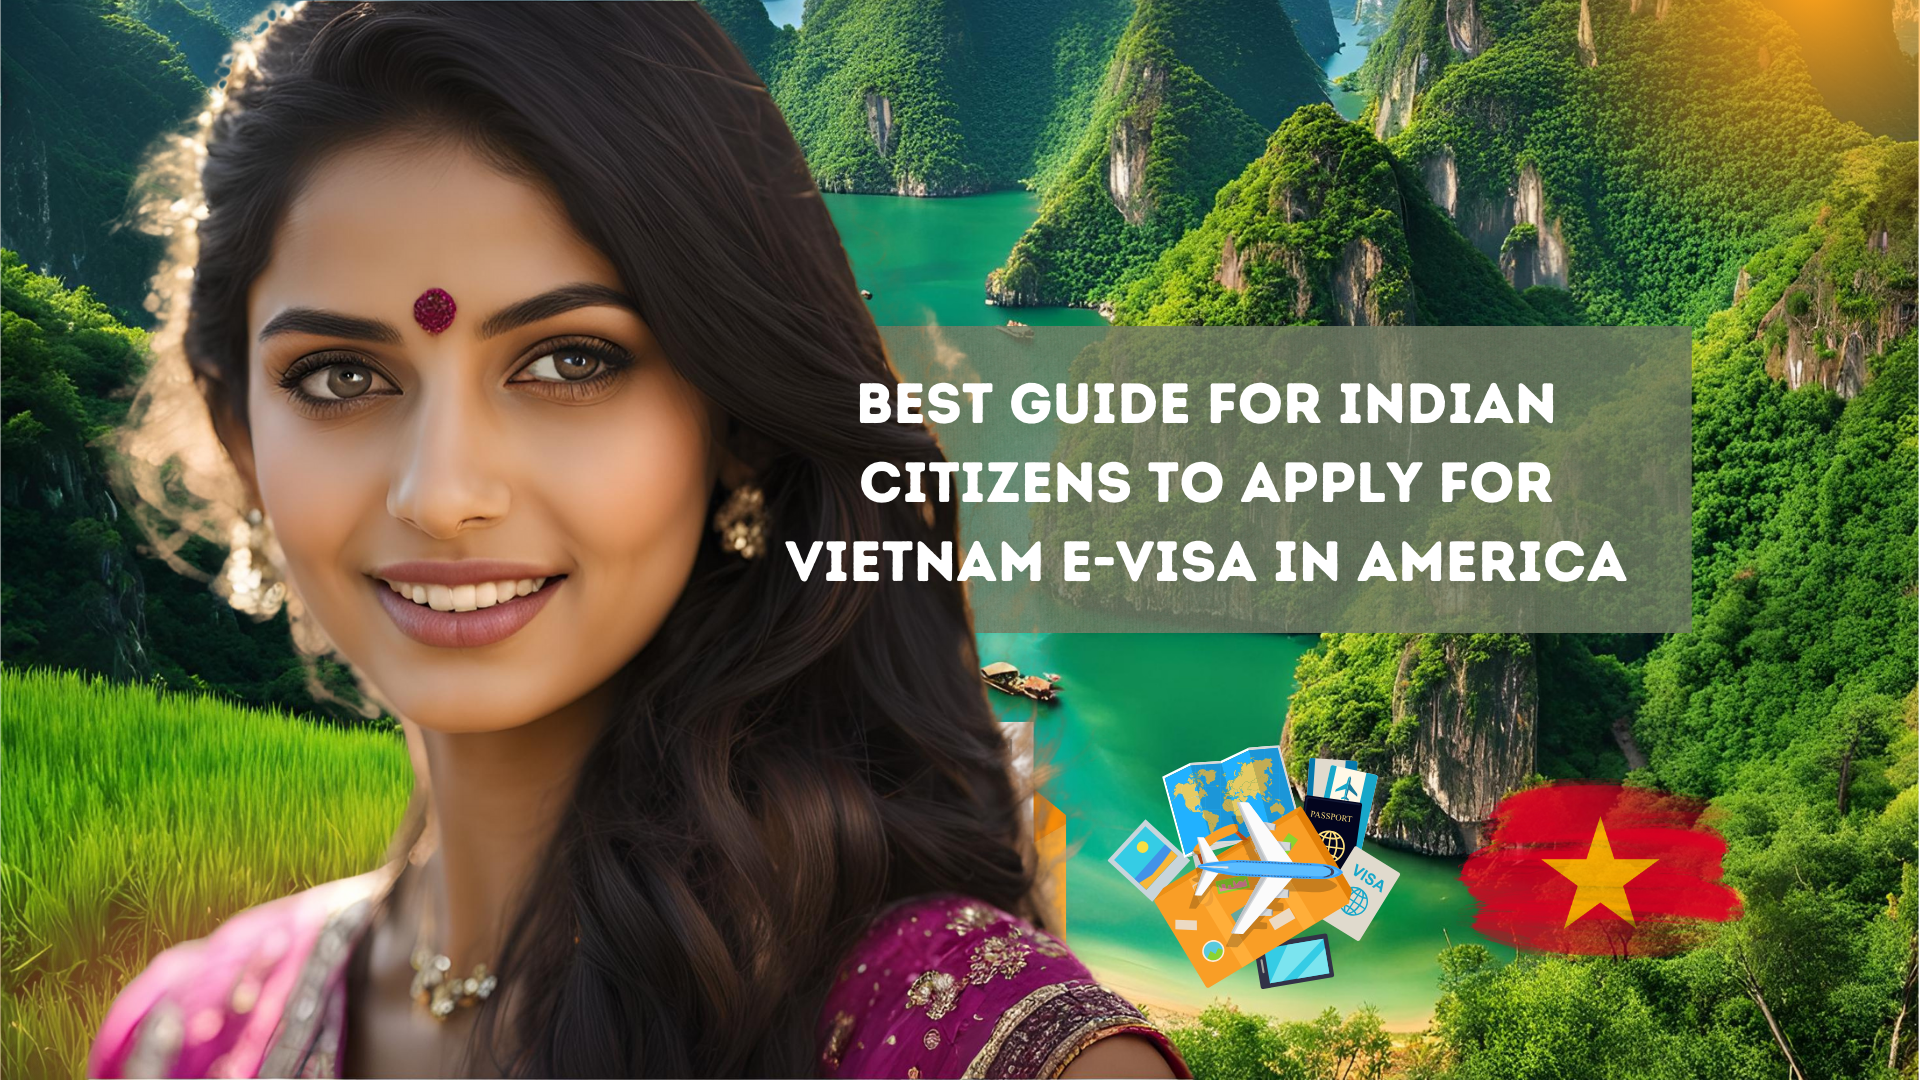 Best Guide for Indian Citizens to Apply for Vietnam E-Visa in America